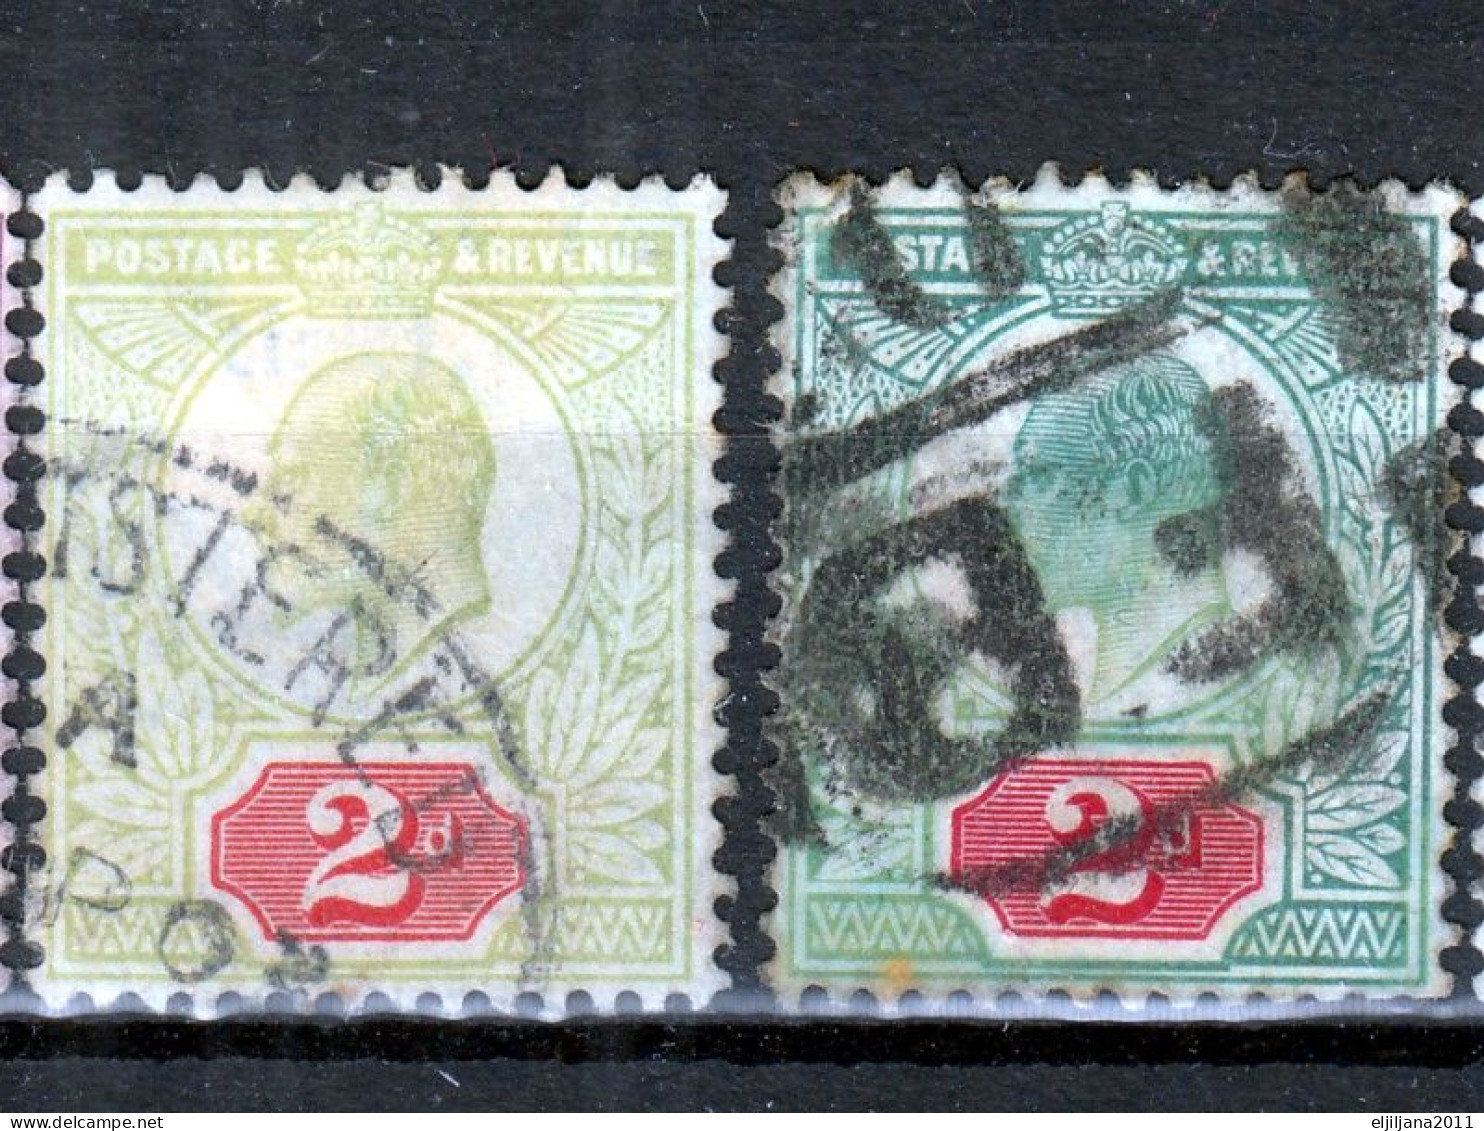 Great Britain - GB / UK 1902 - 1913 ⁕ KEVII. 30v used / shades / unchecked - see scan